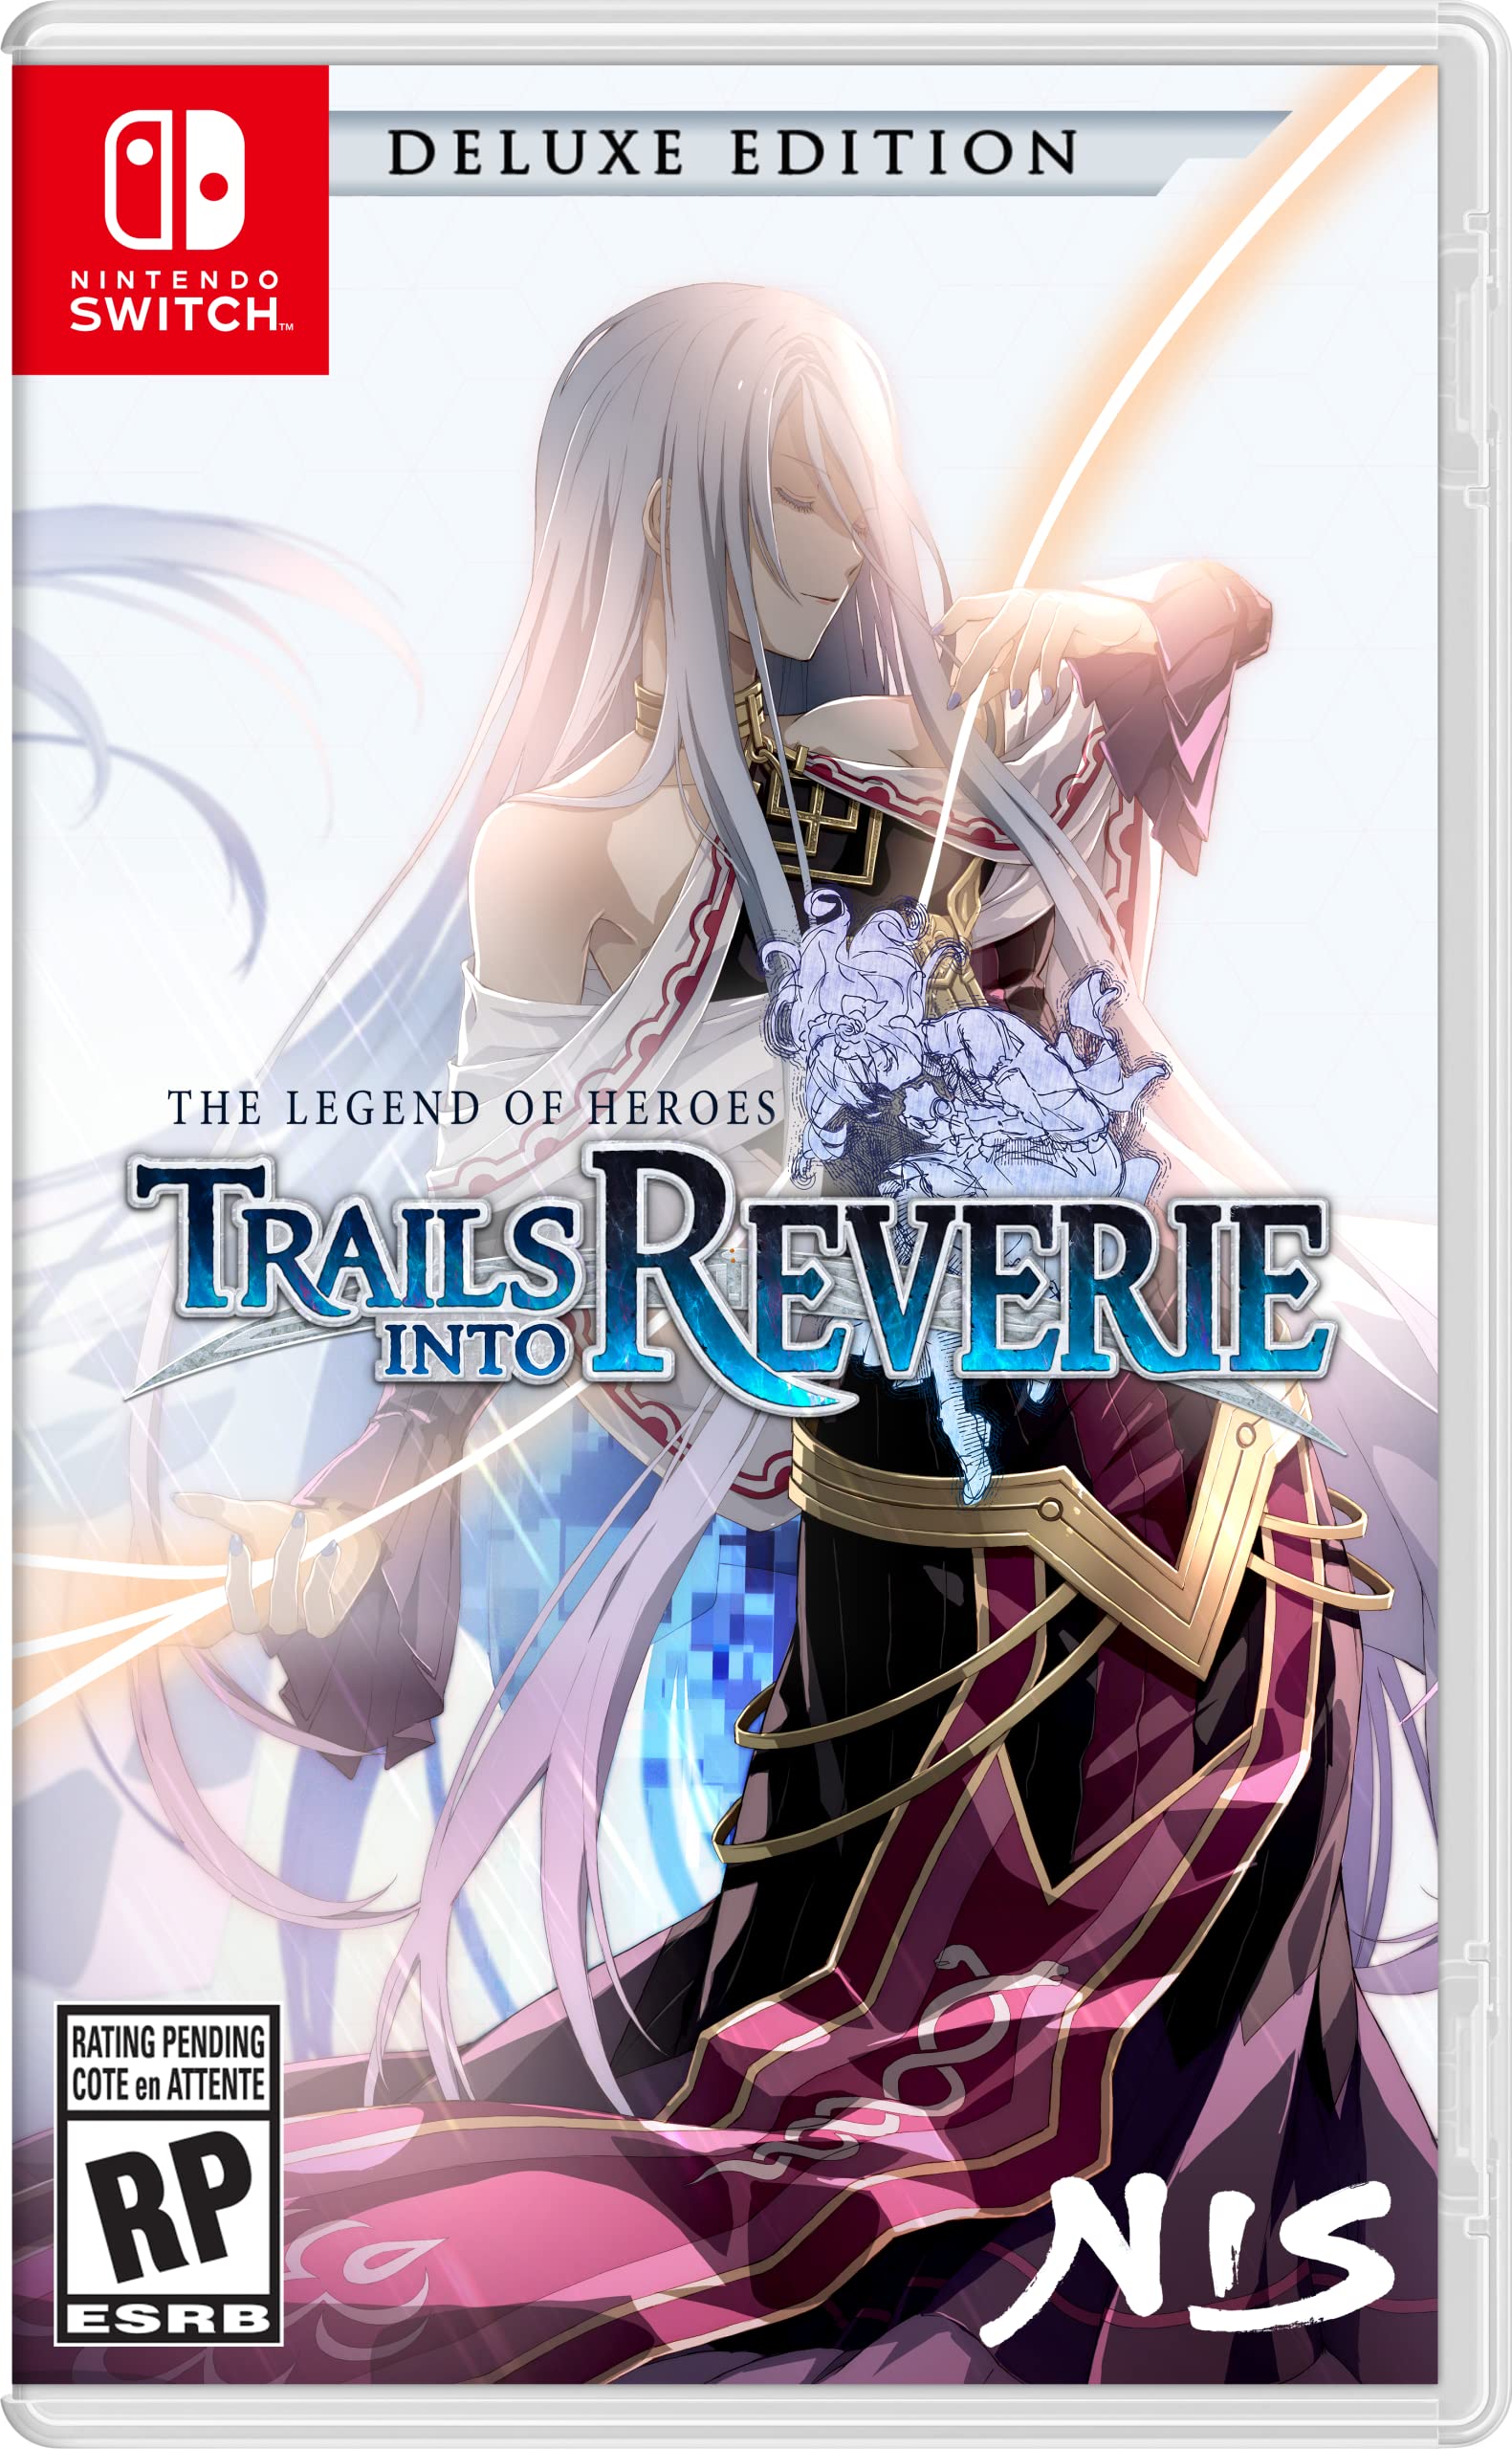 The Legend of Heroes: Trails into Reverie Switch, Koei Tecmo America Corpor: Video Games